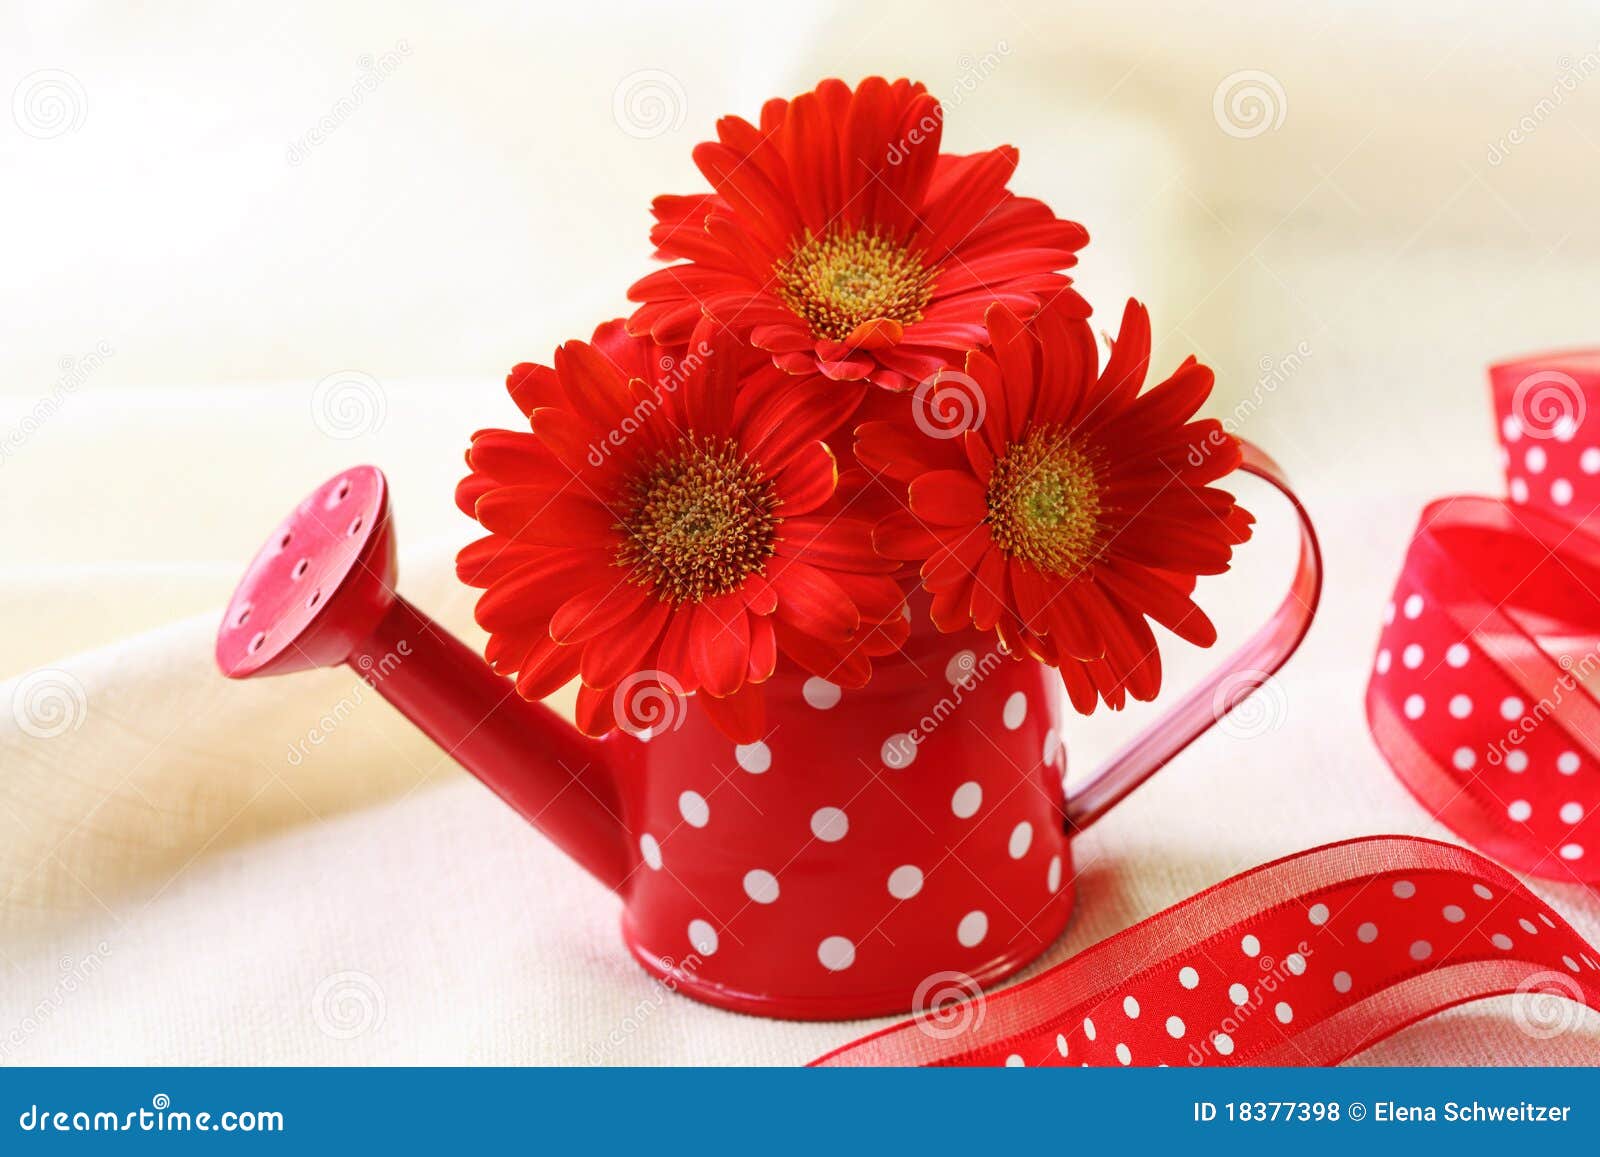 Red gerber flowers stock photo. Image of dots, valentin - 18377398